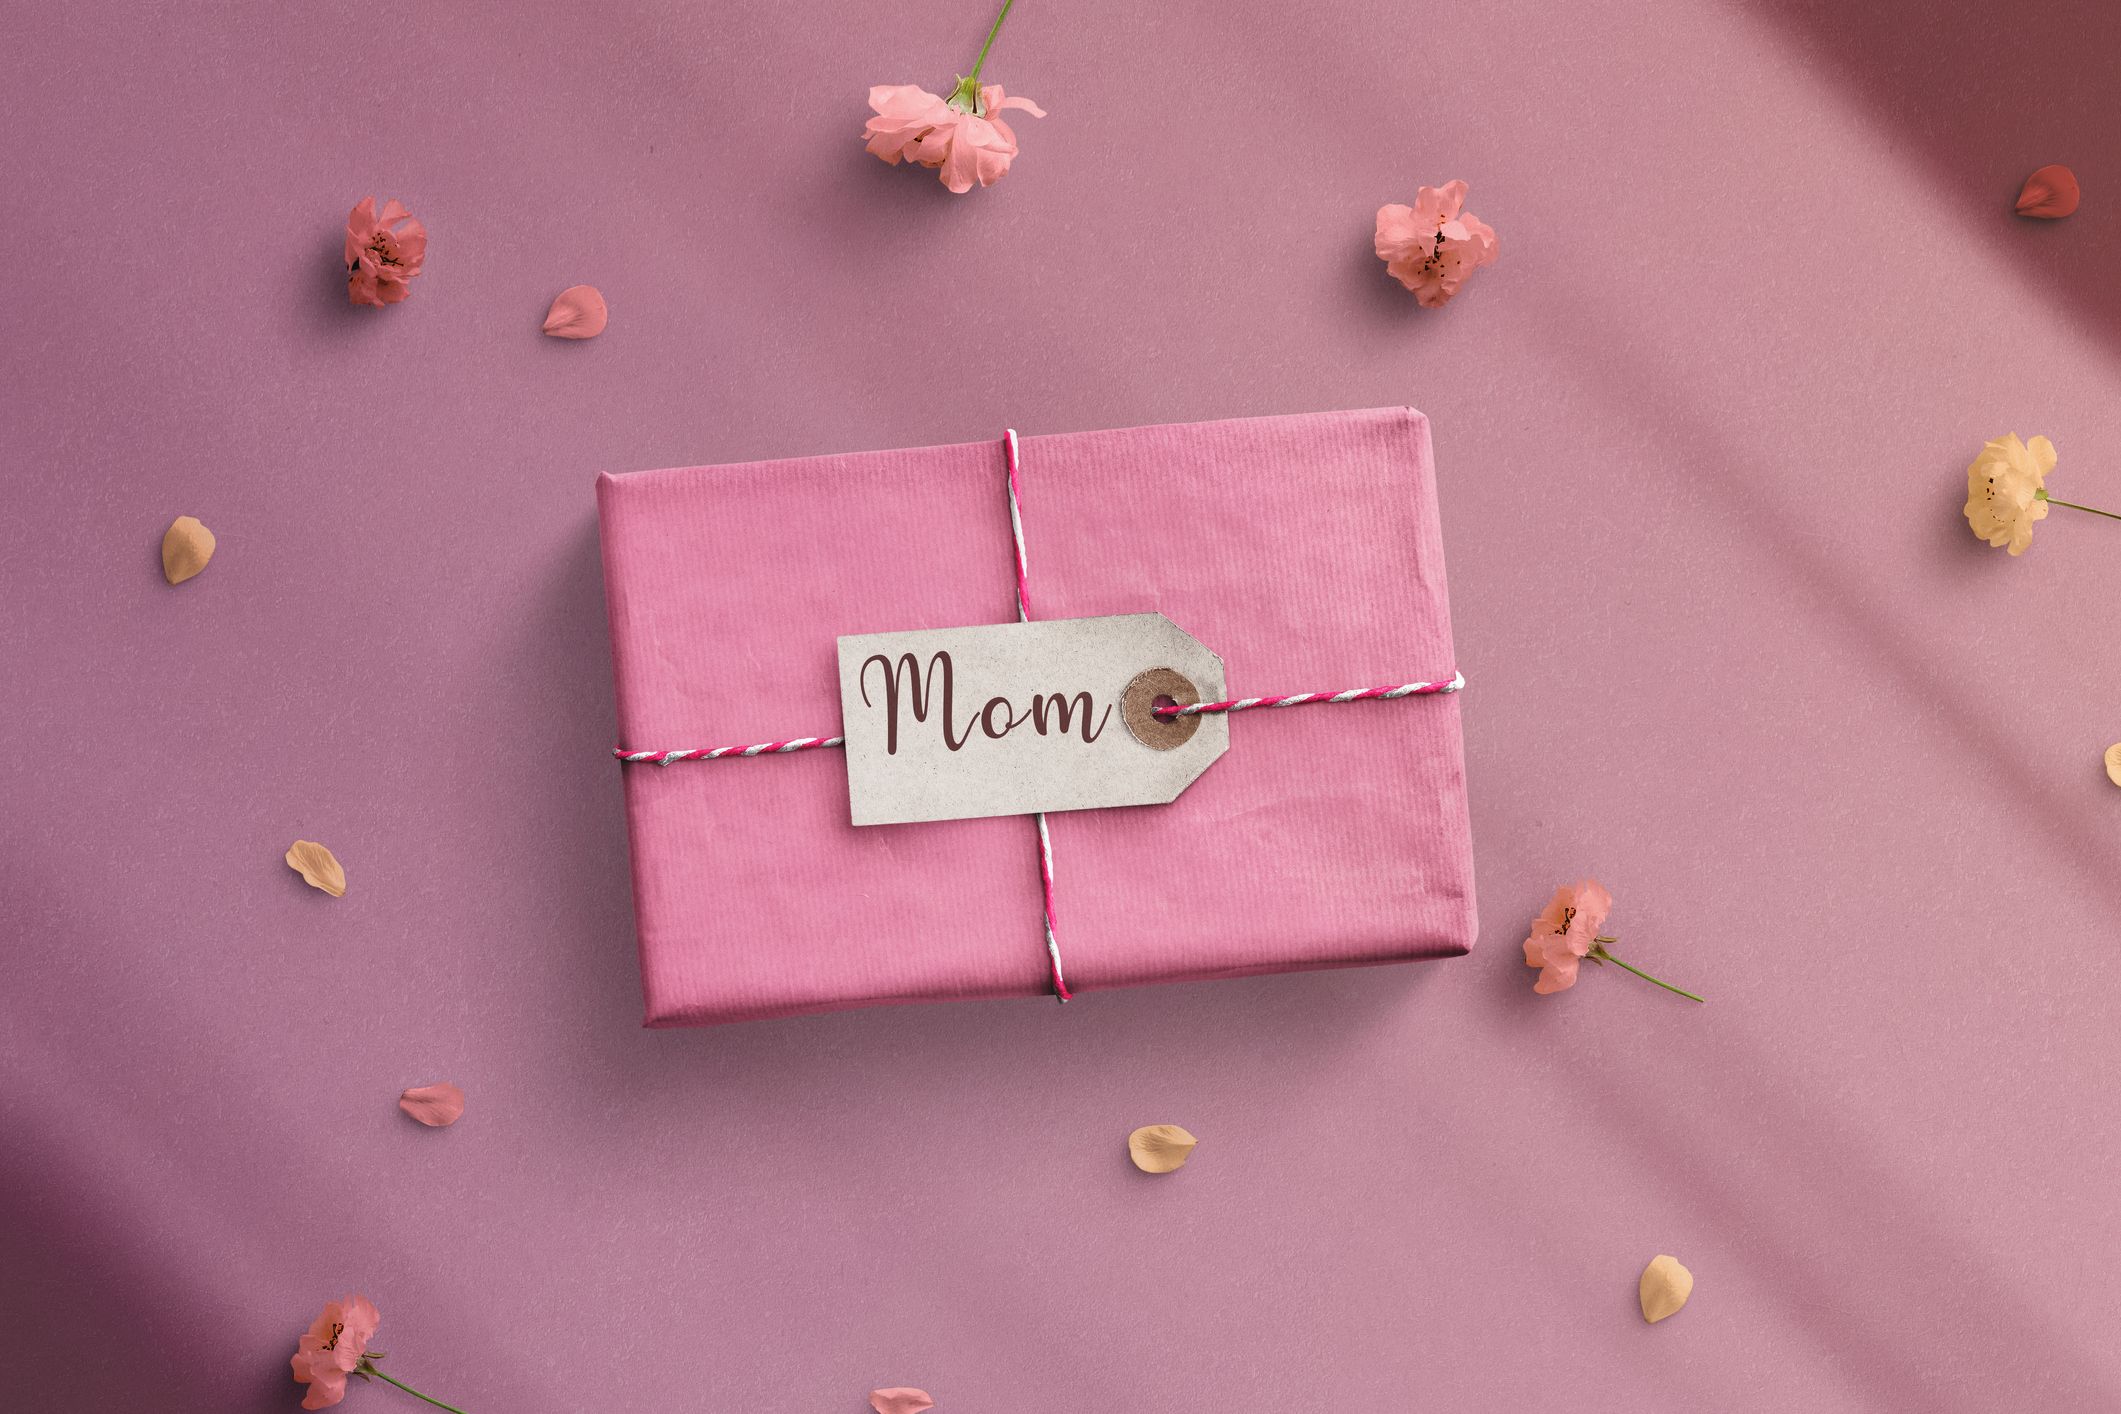 30 Best Mother's Day Gifts 2022 - Mother's Day Gift Ideas